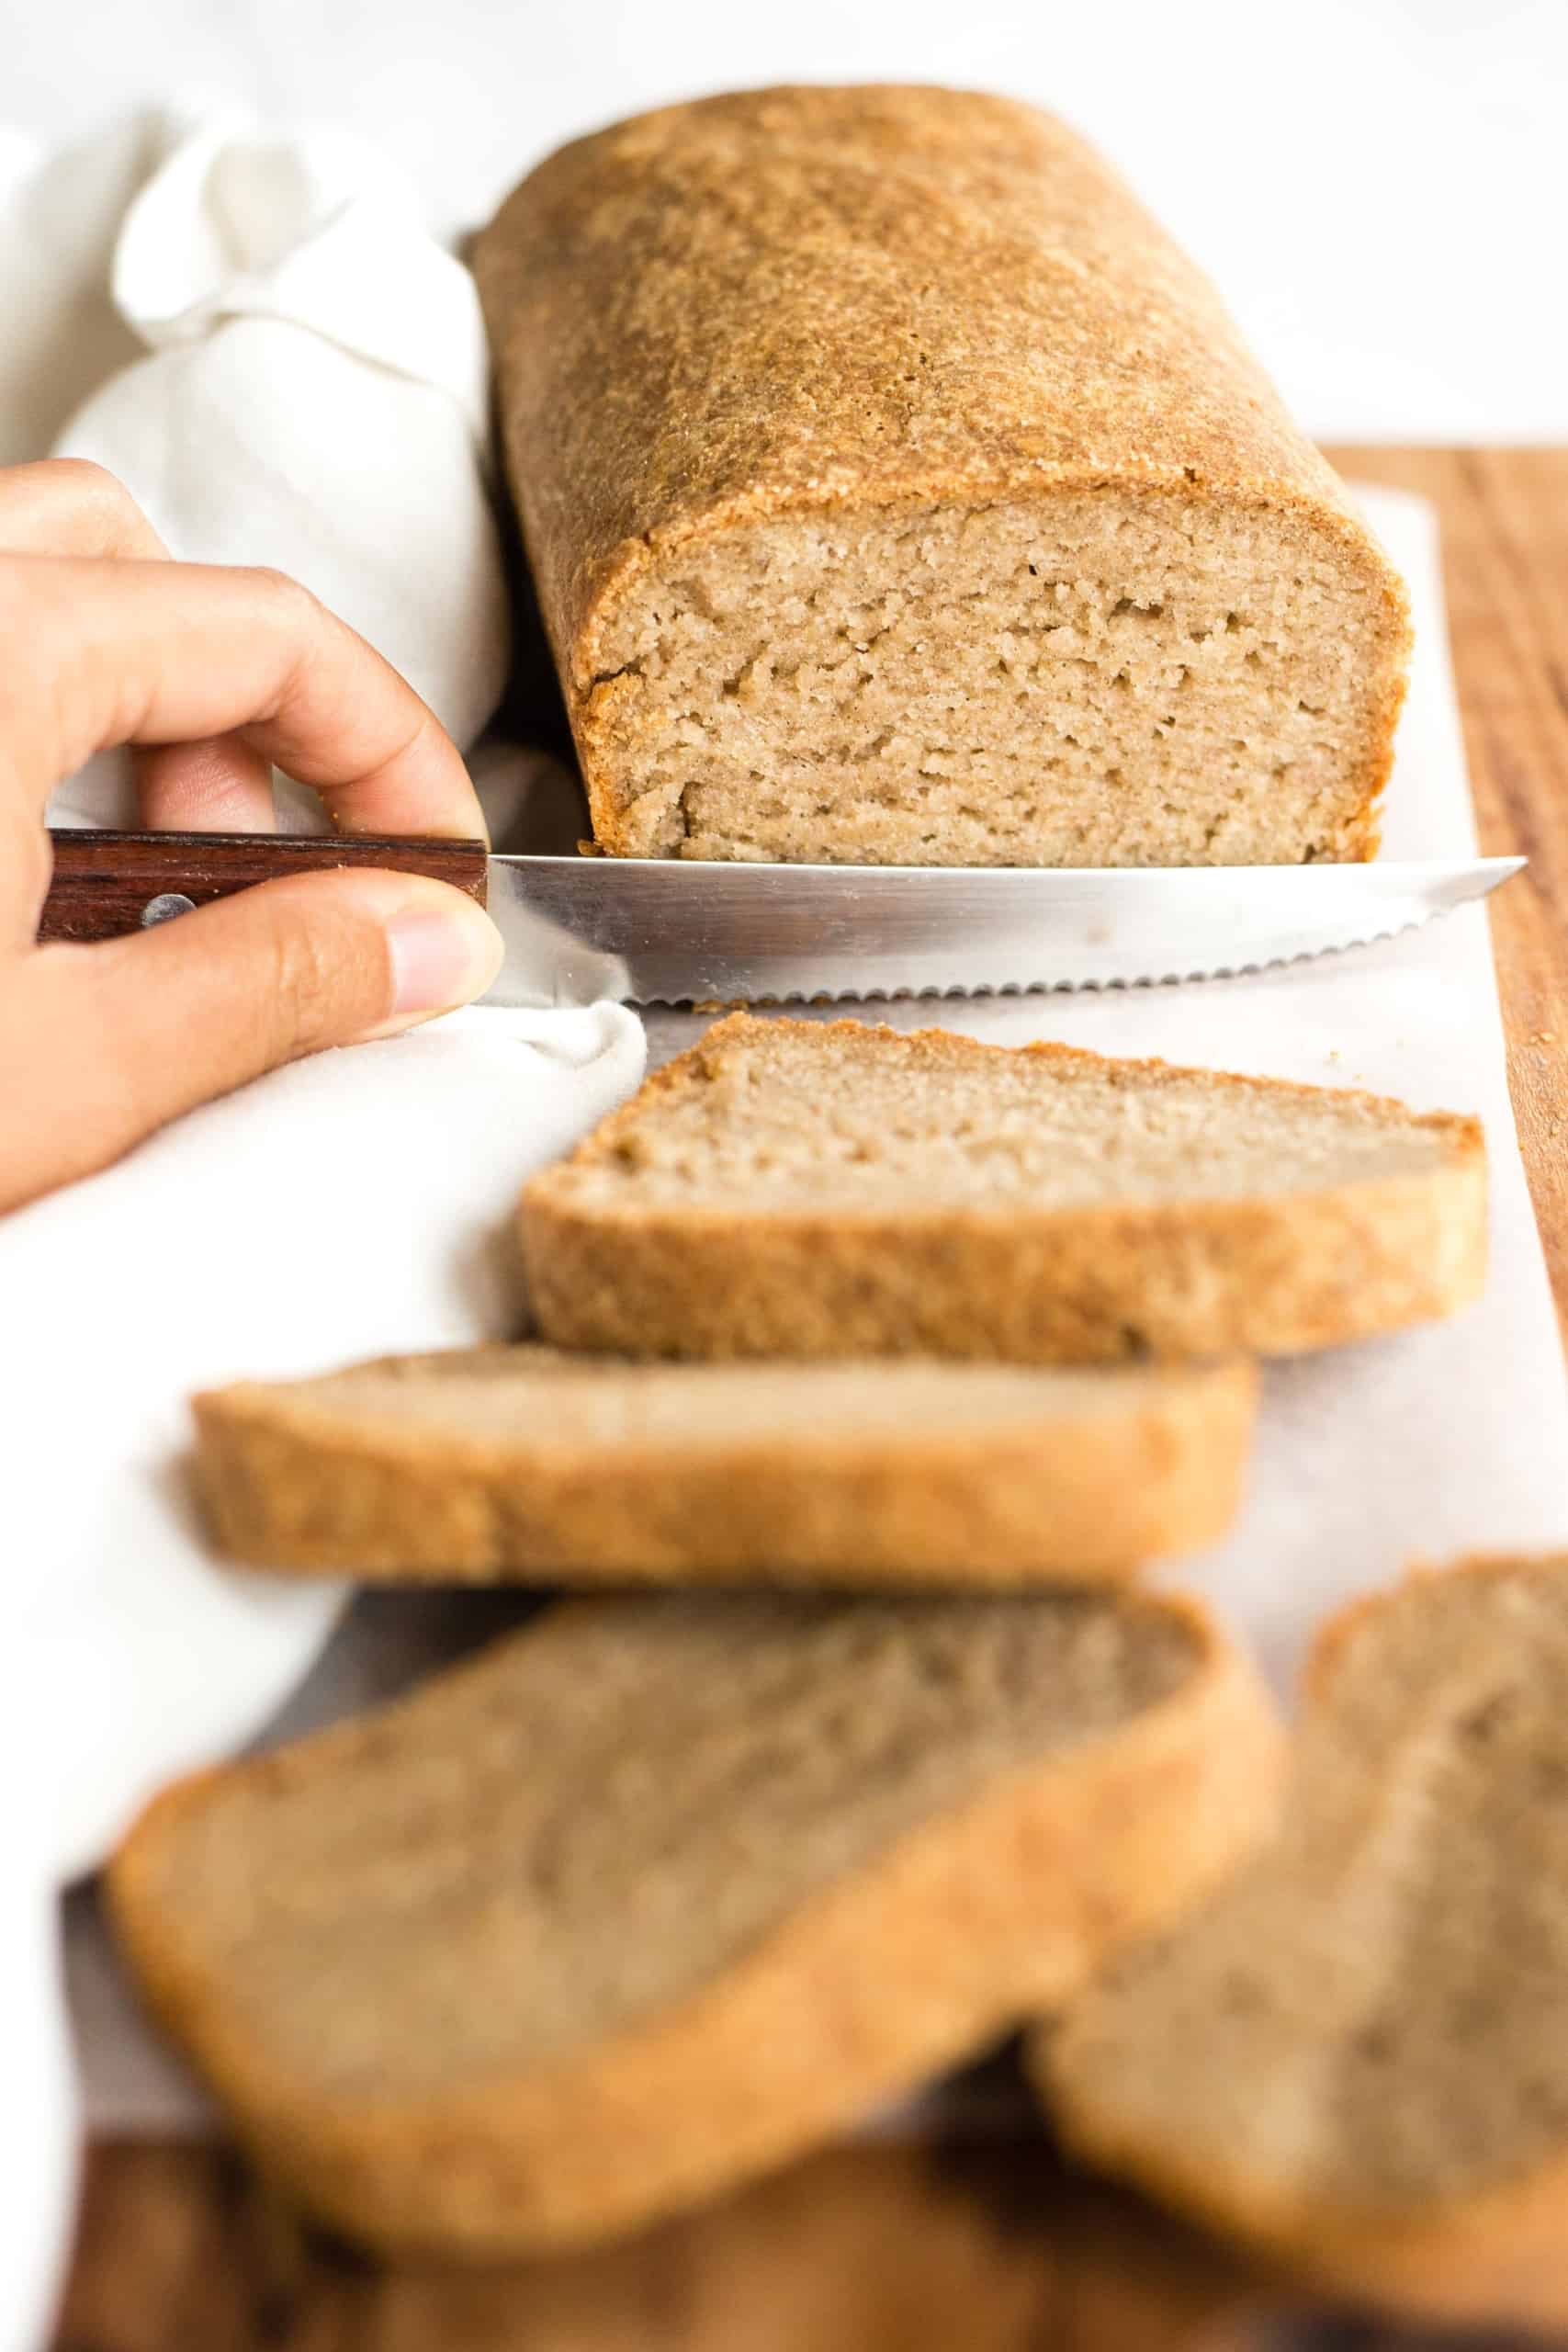 Slicing into a loaf of gluten-free brown bread.